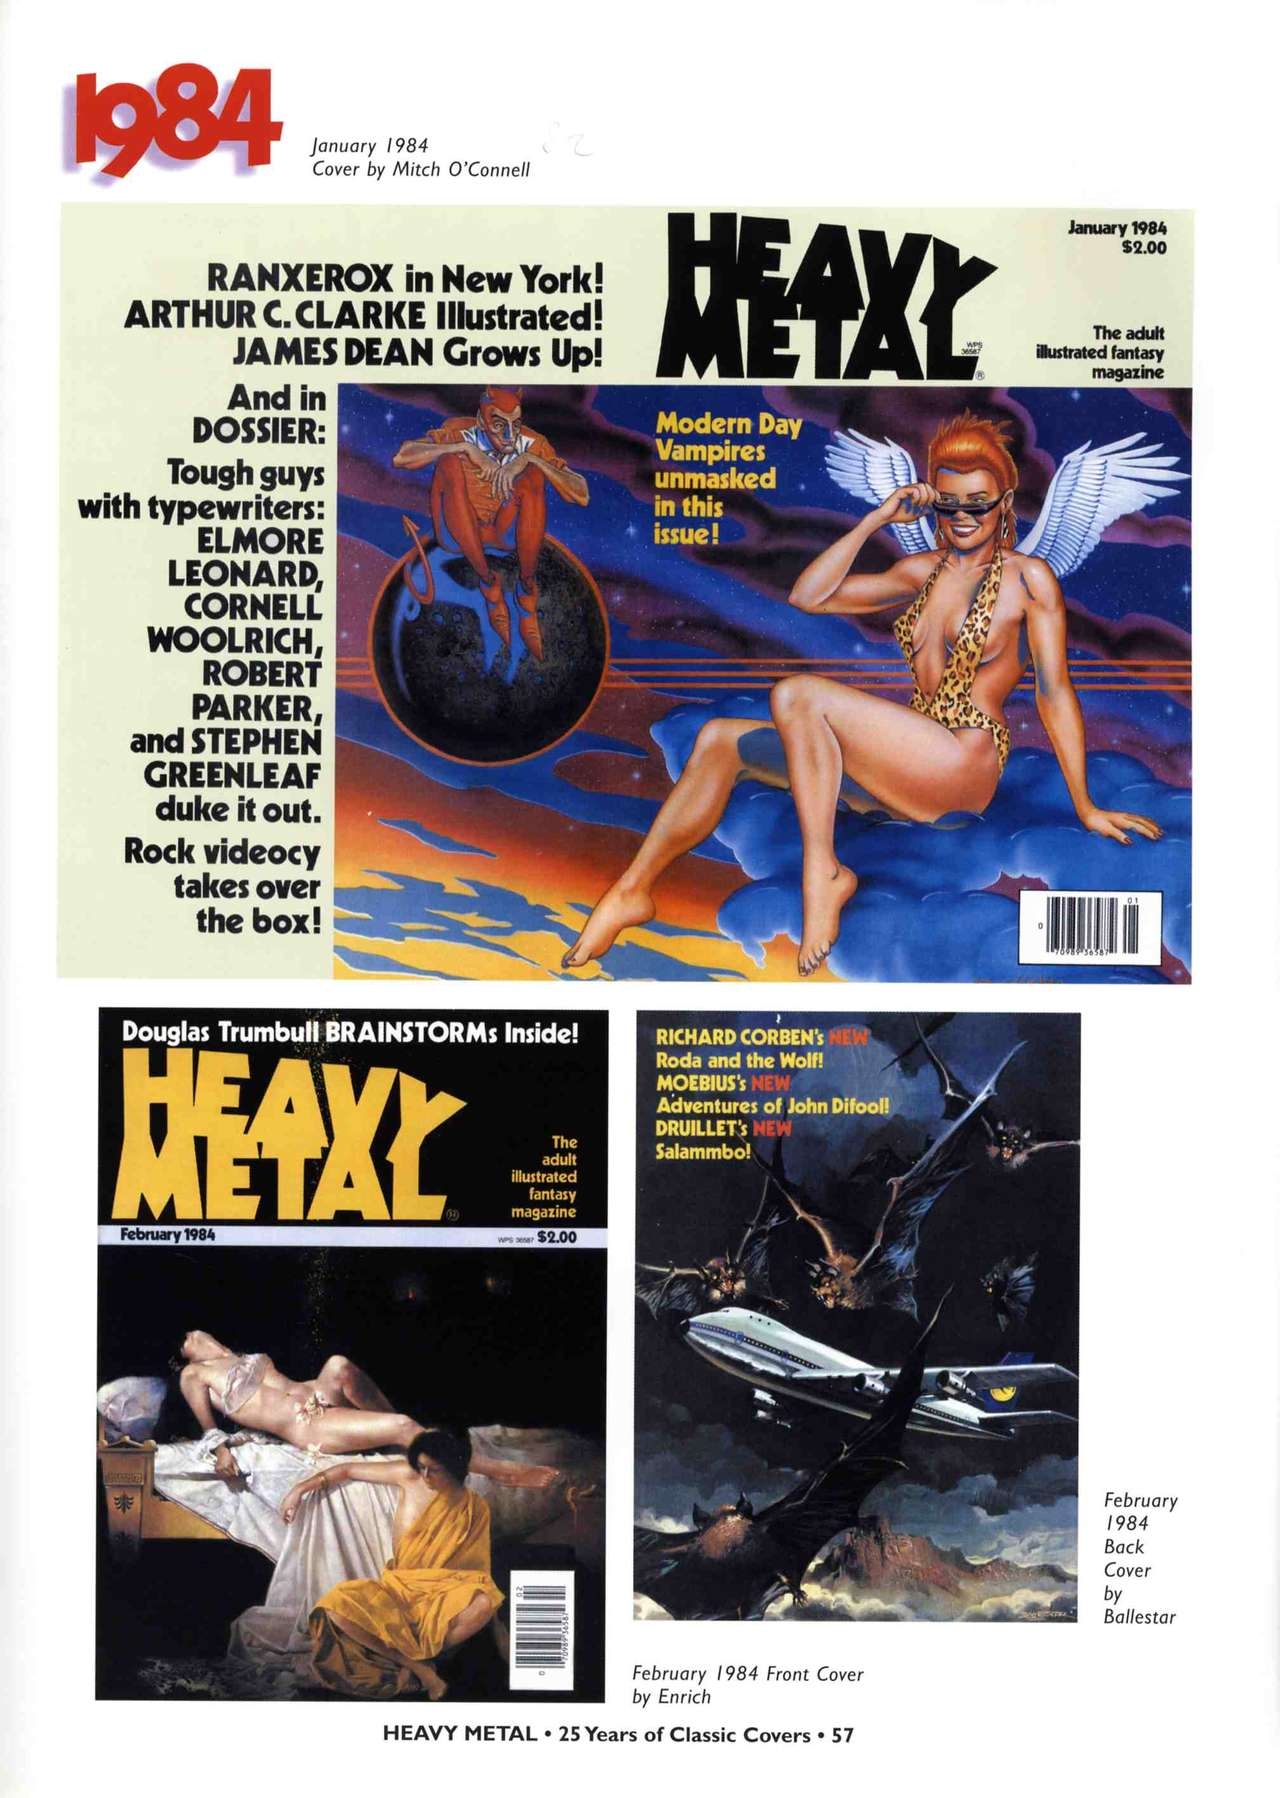 HEAVY METAL 25 Years of Classic Covers 62